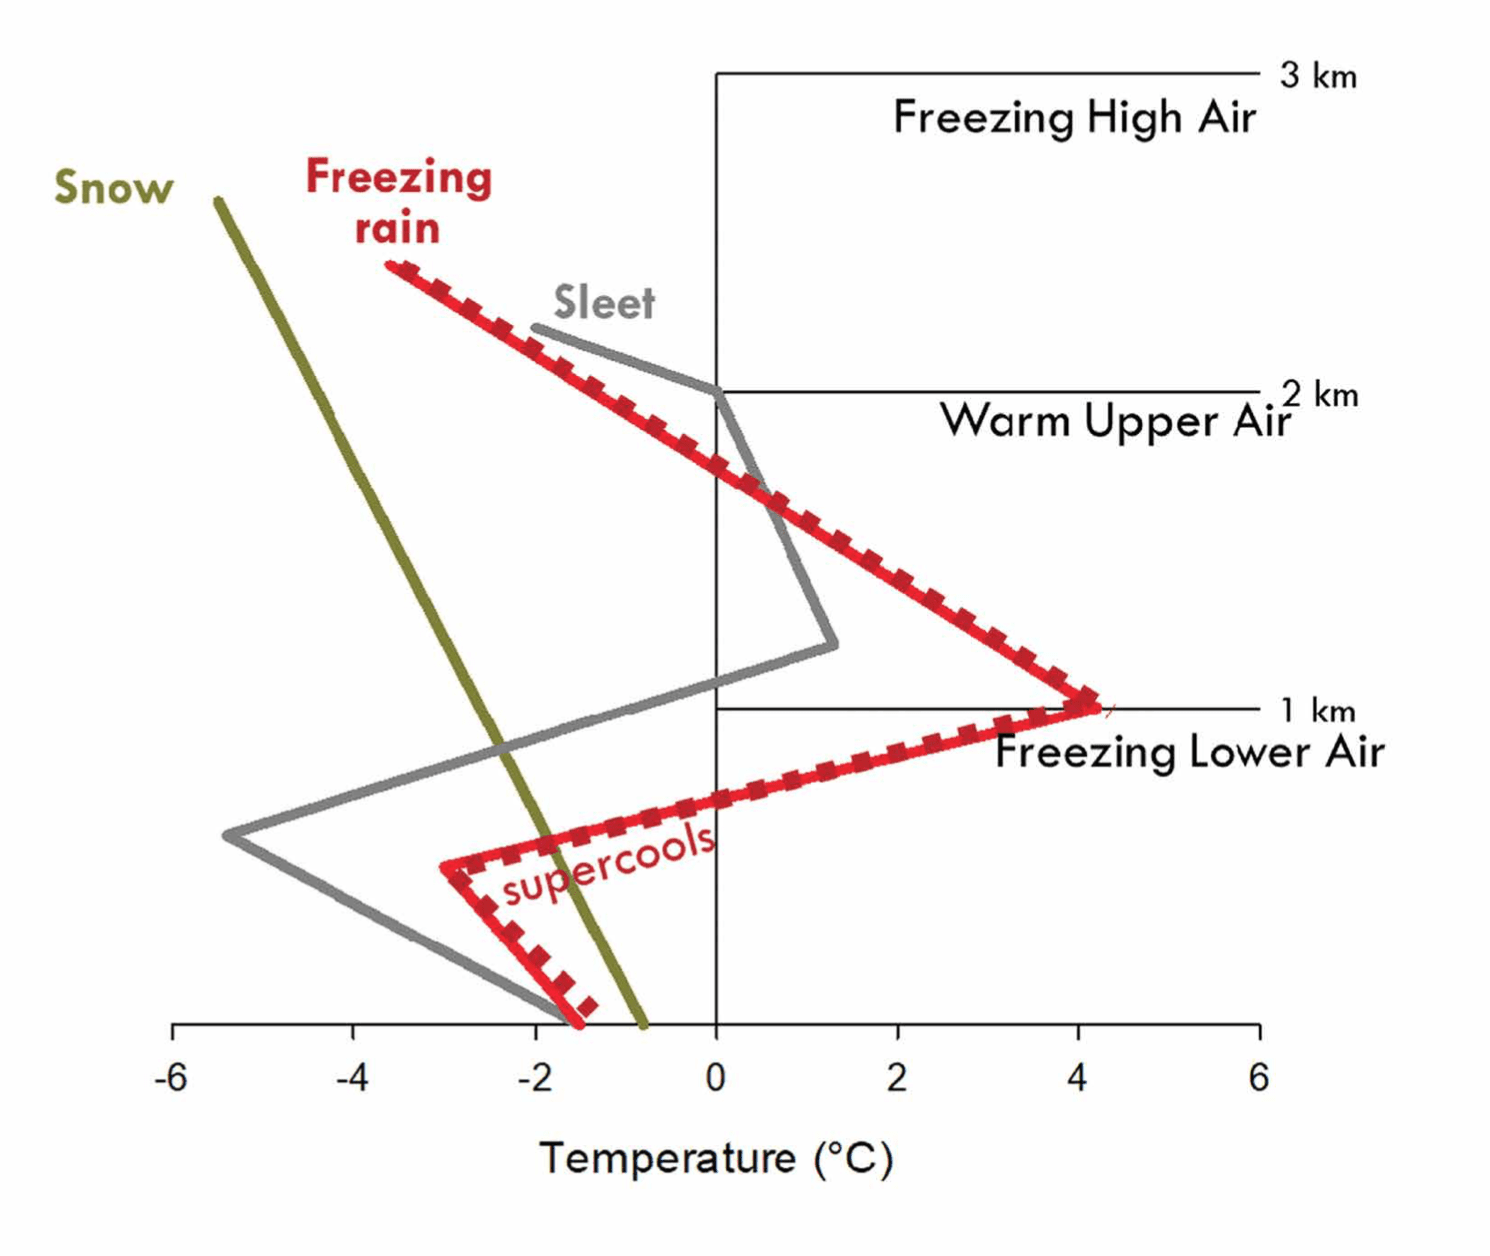 Figure showing atmospheric conditions needed to produce ice storms. From Rustad and Campbell, 2012.